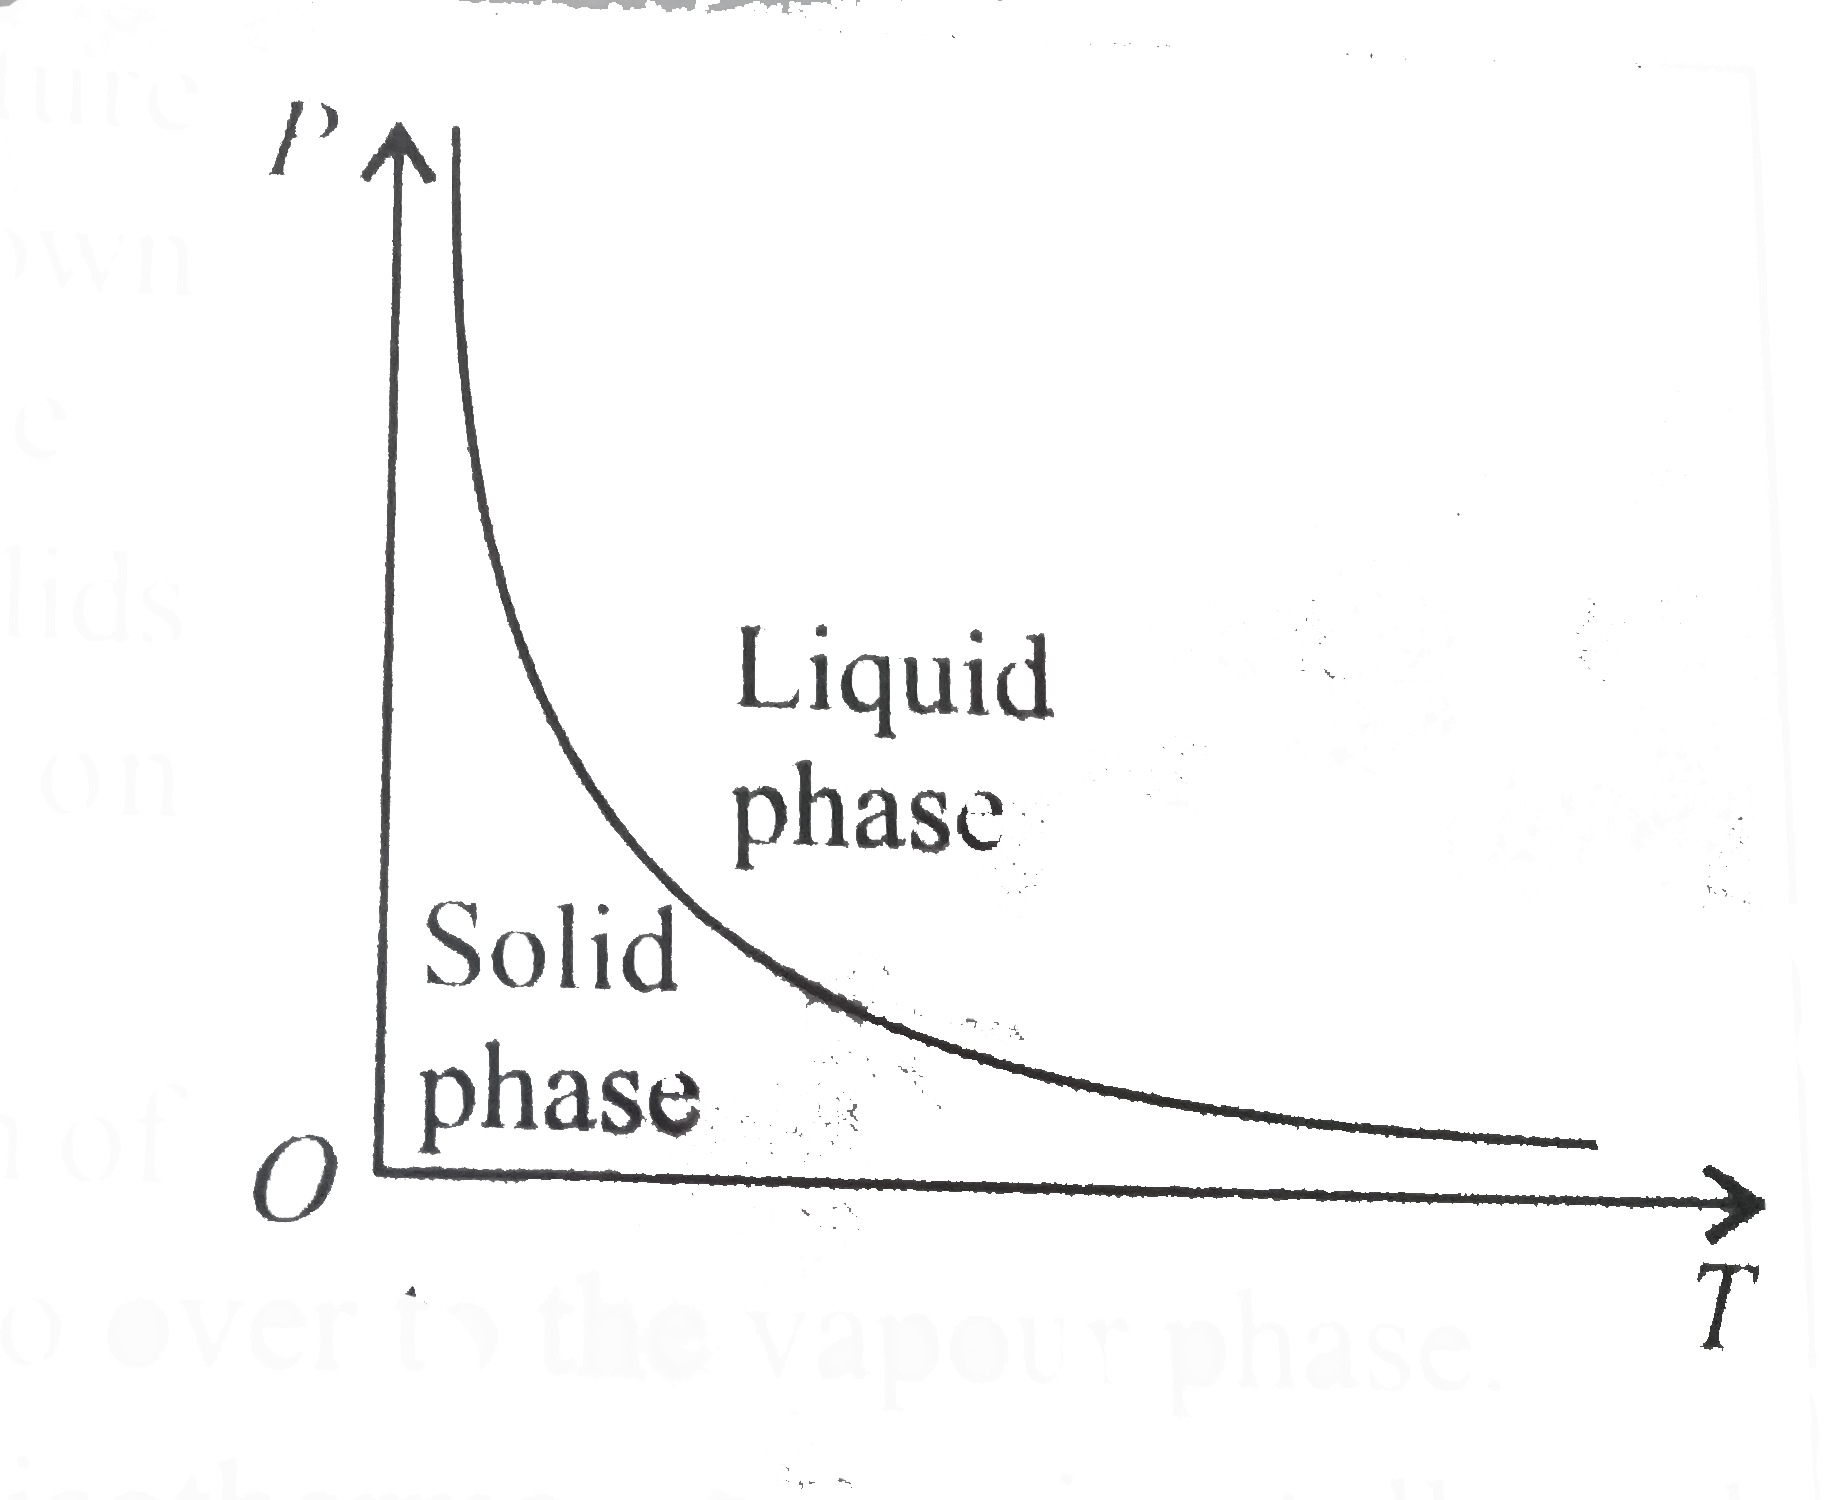 The pressure -temperature (P-T) phase diagram shown below corresponds to the   a. Curve of fusion of solids that expand on solidification.   b. Curve of sublimation of solids that directly go over to the vapour phase.